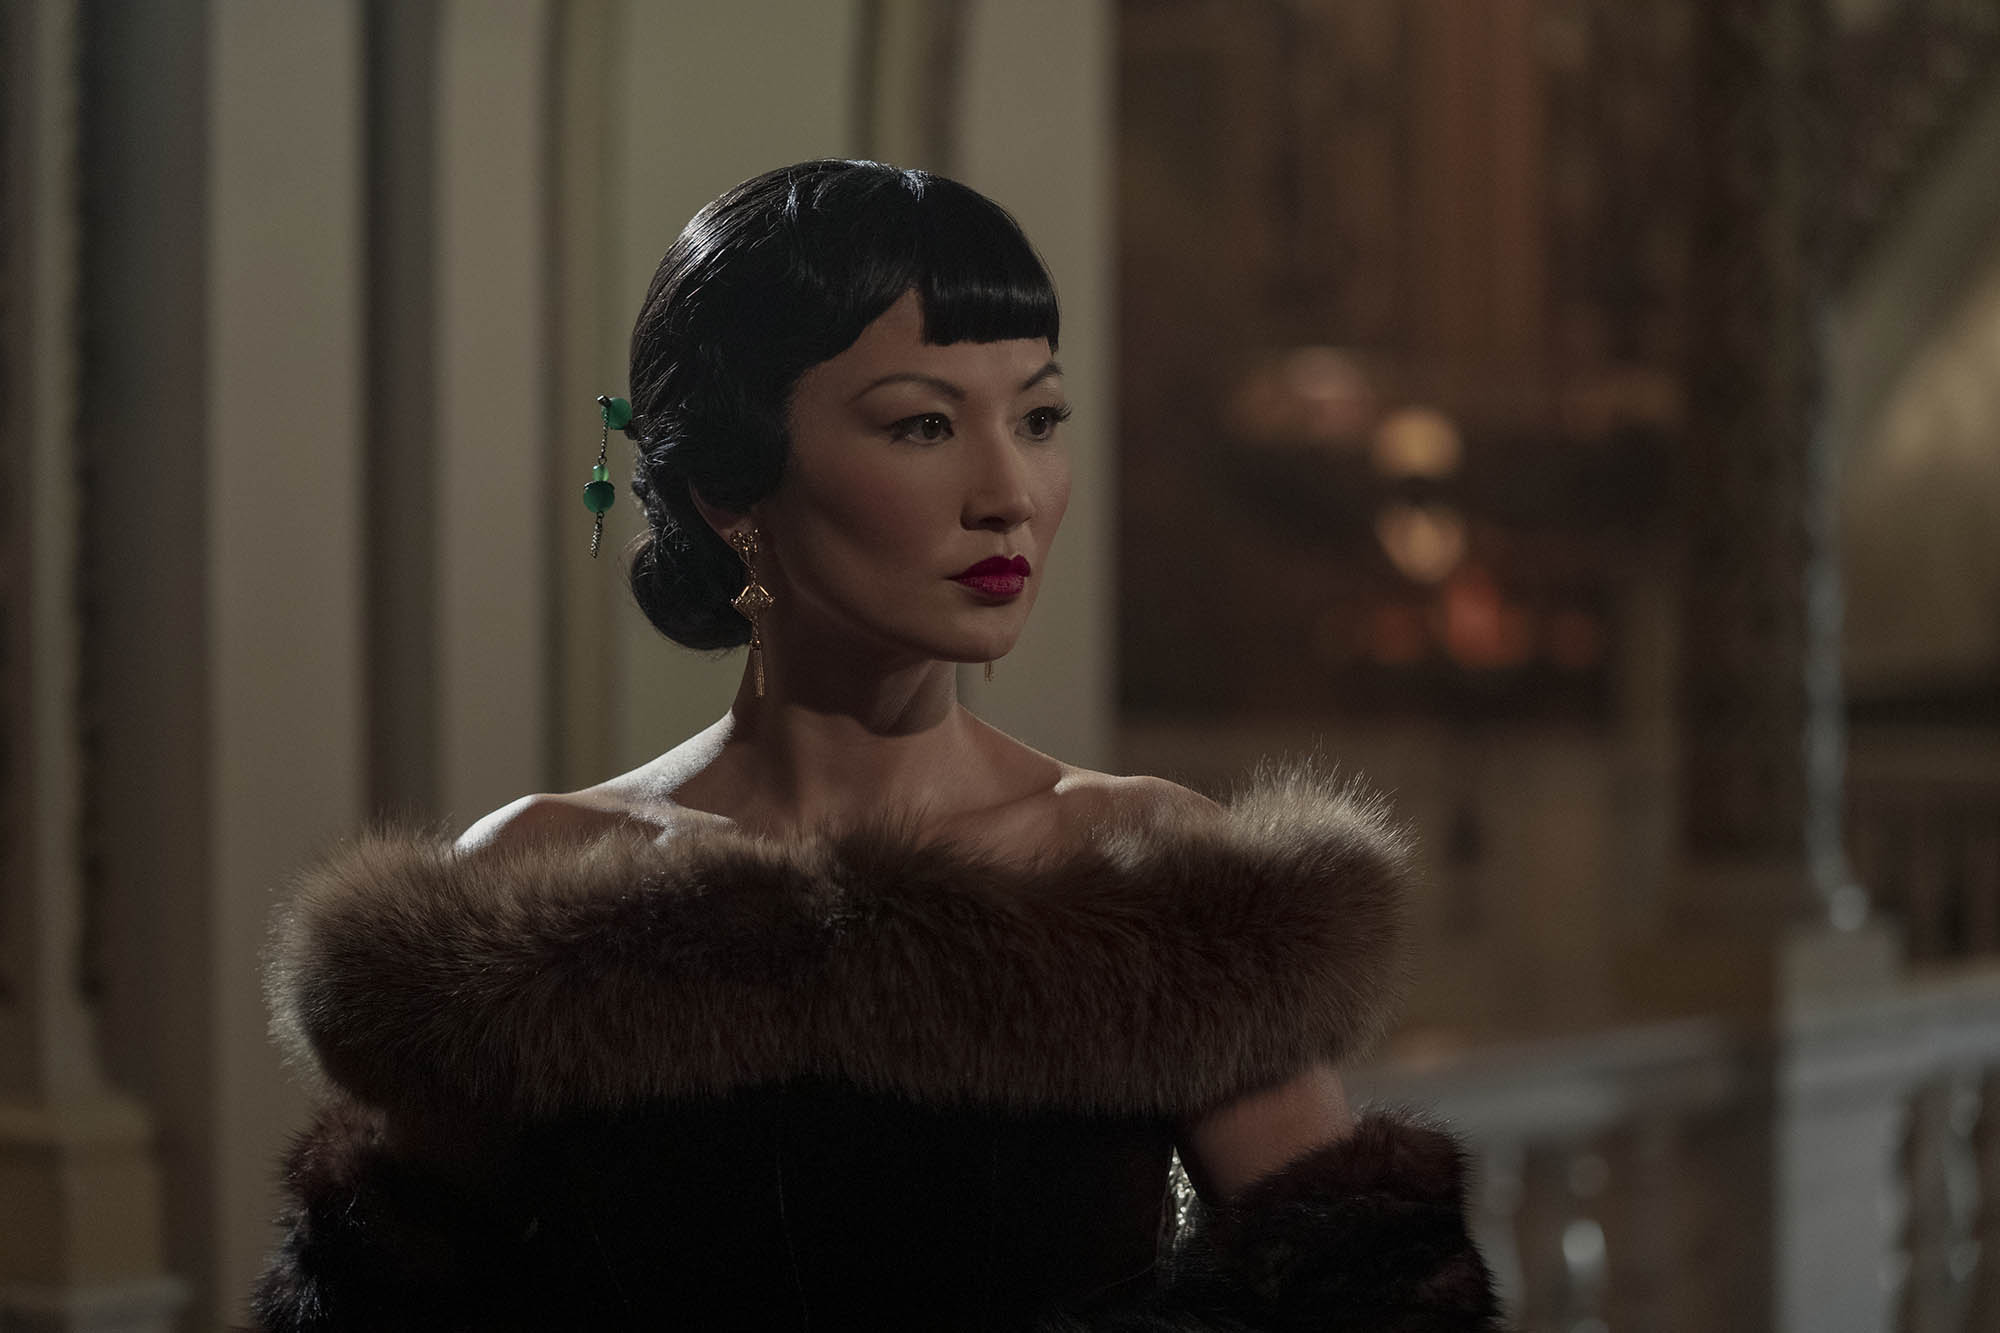 Anna May Wong “Changed” Hollywood & Is Now Remembered